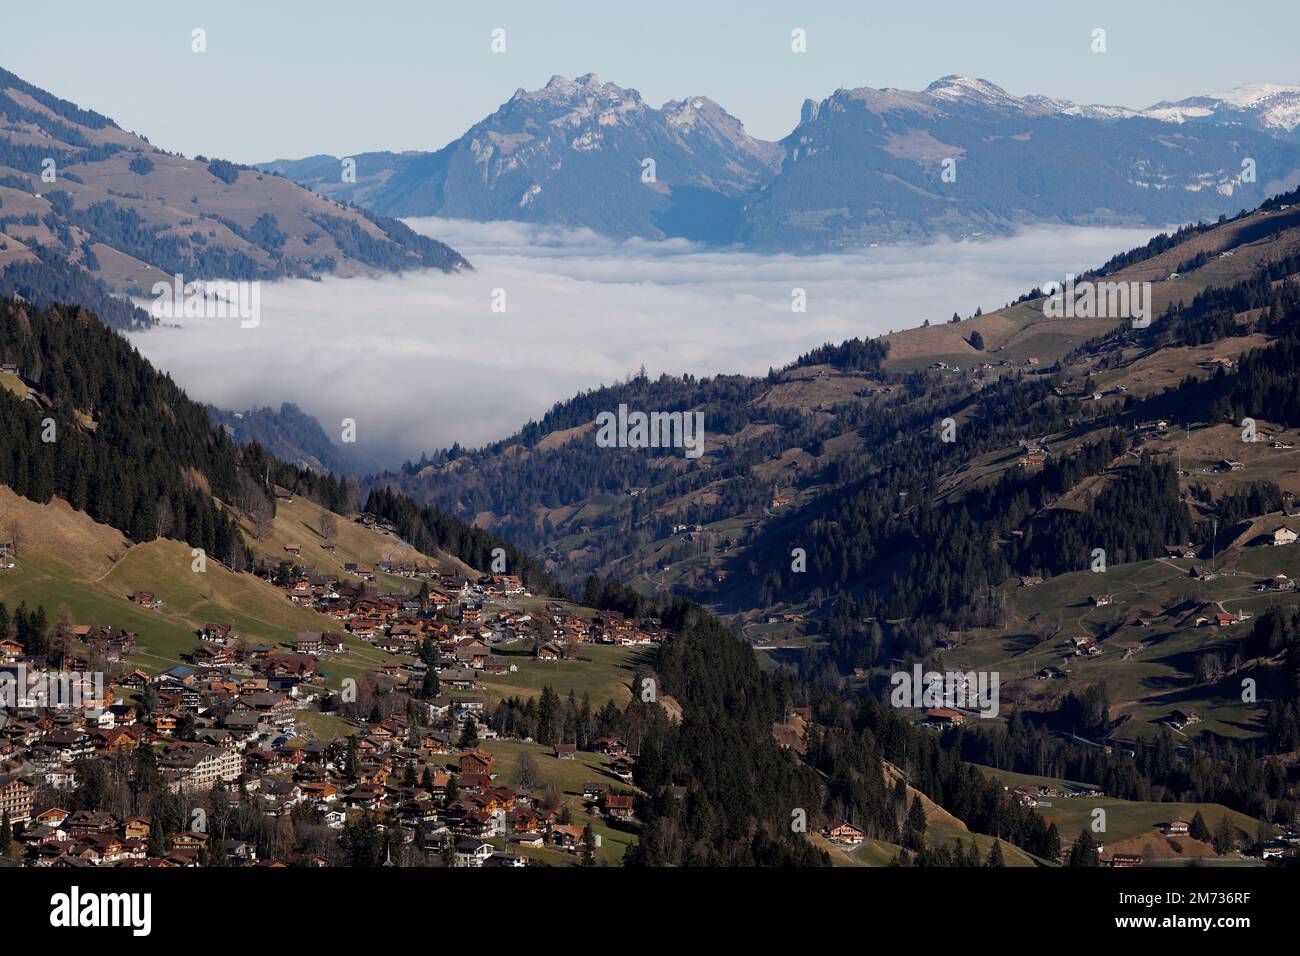 Alpine Skiing - FIS Alpine Ski World Cup - Men's Giant Slalom - Adelboden, Switzerland - January 7, 2023 General view during the event REUTERS/Stefan Wermuth Stock Photo